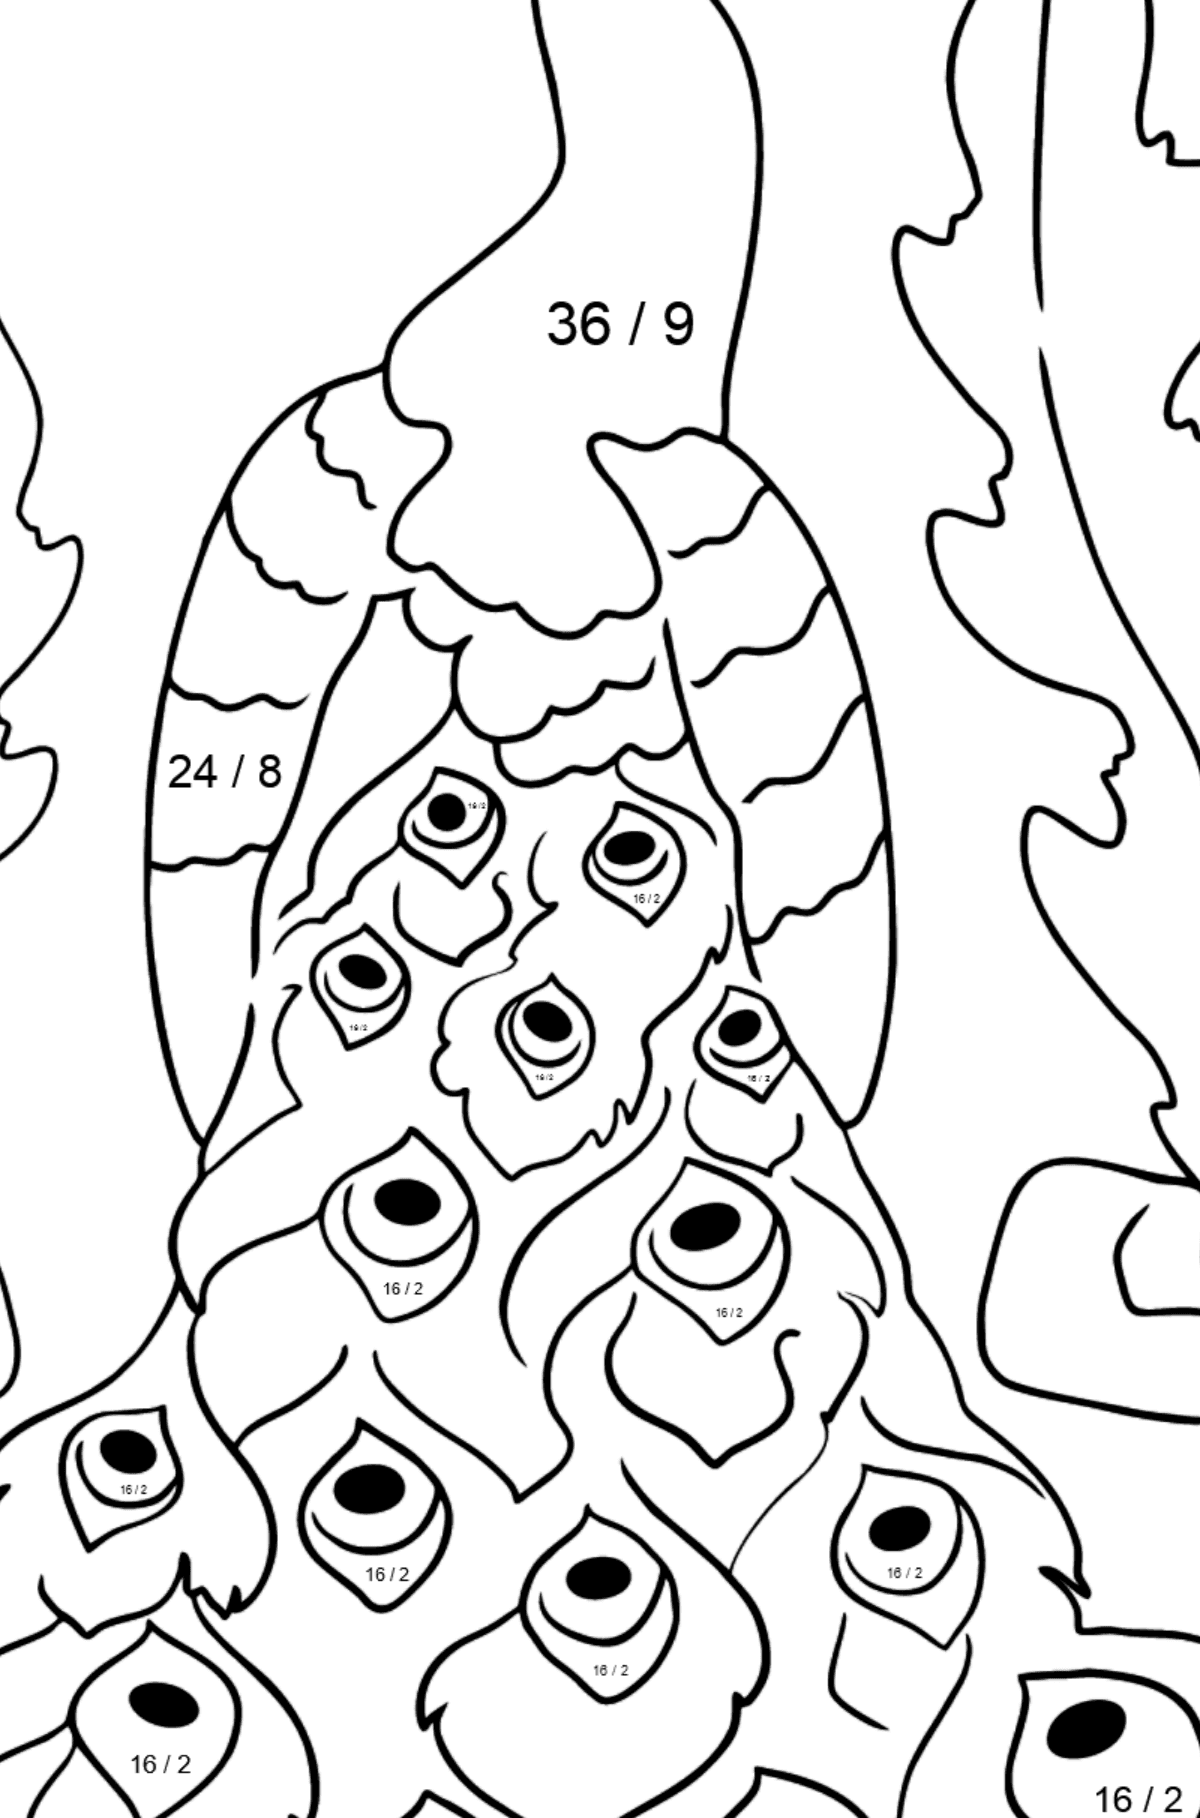 A Pompous and Haughty Peacock Coloring Page - Math Coloring - Division for Kids